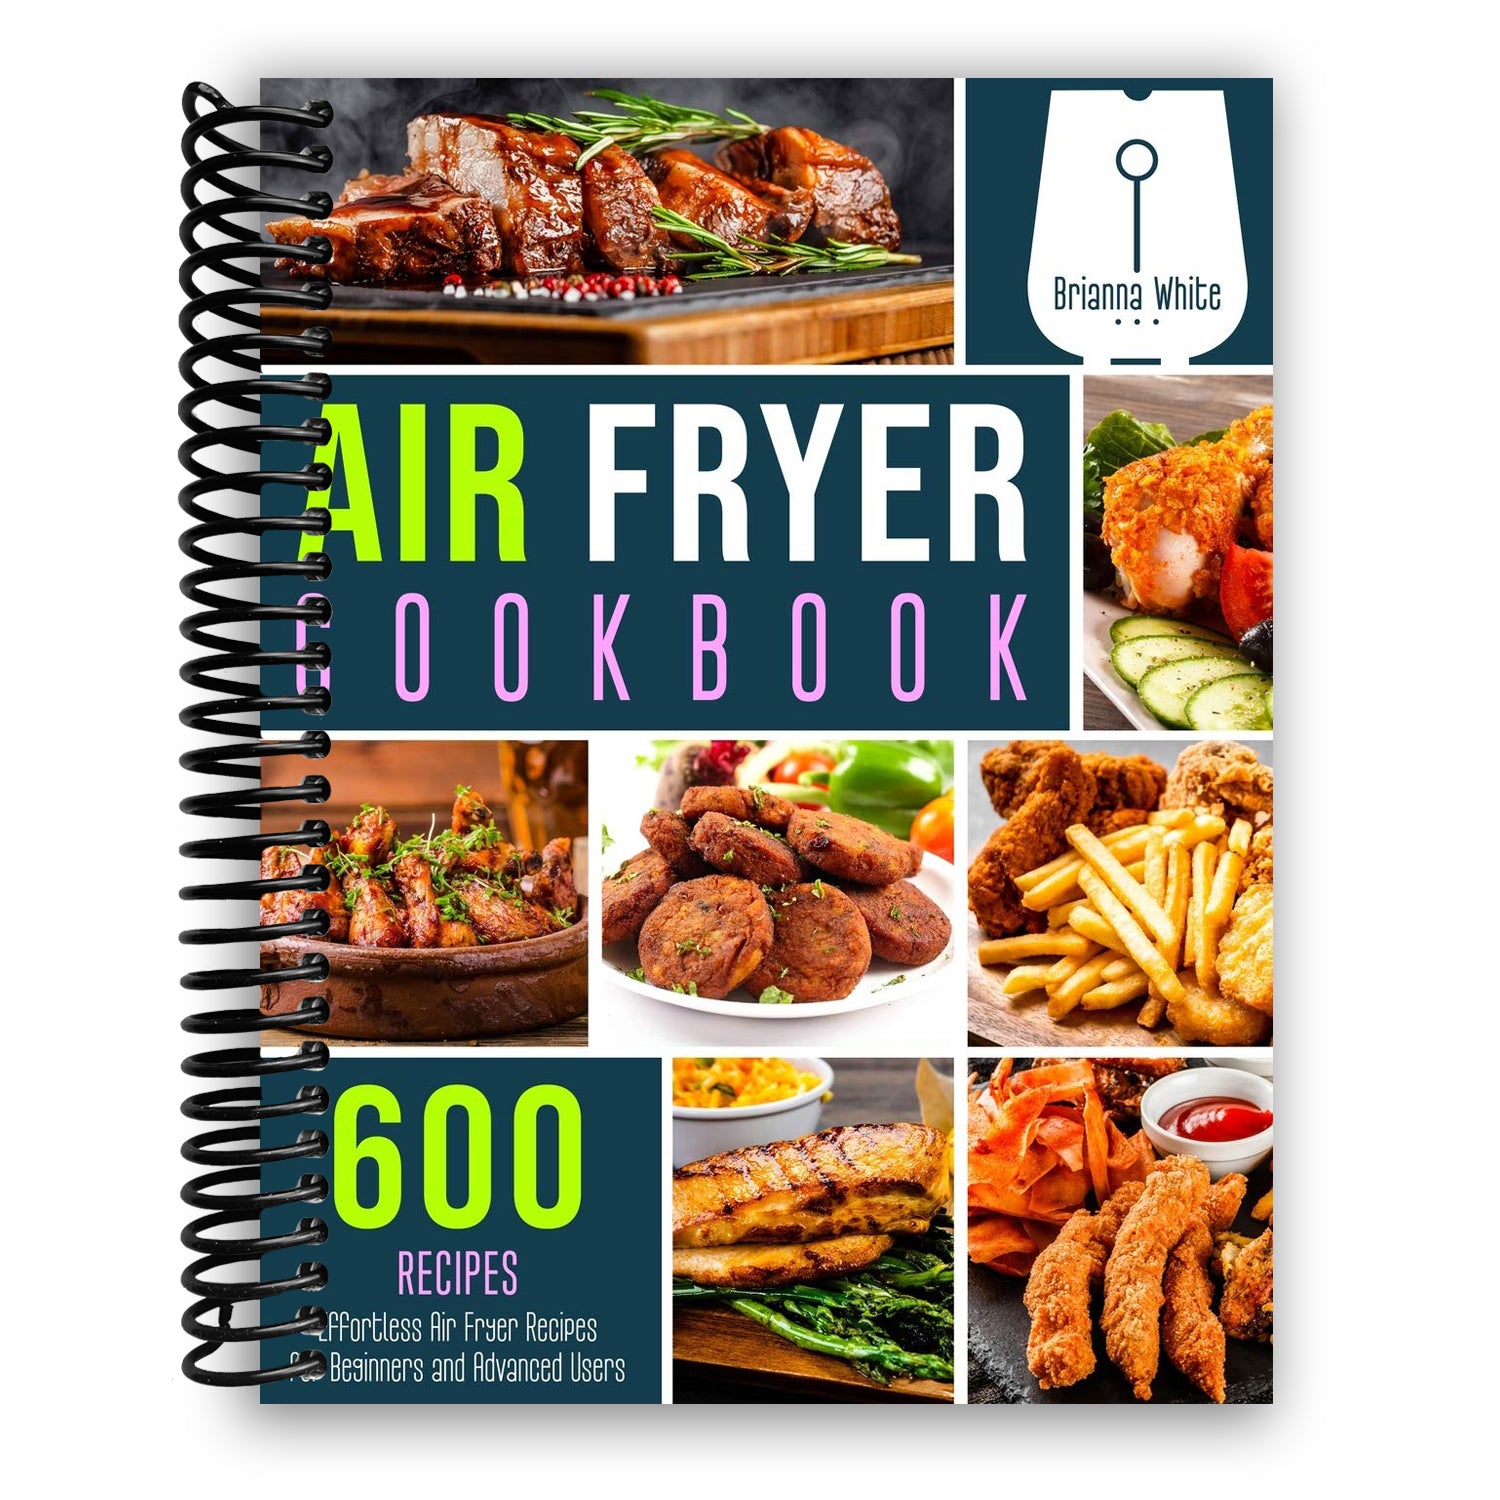 Cosori Air Fryer Cookbook : 250 Tasty and Healthy Recipes for the Whole  Family. Complete Beginner's Guide for Your Air Fryer (Paperback) 